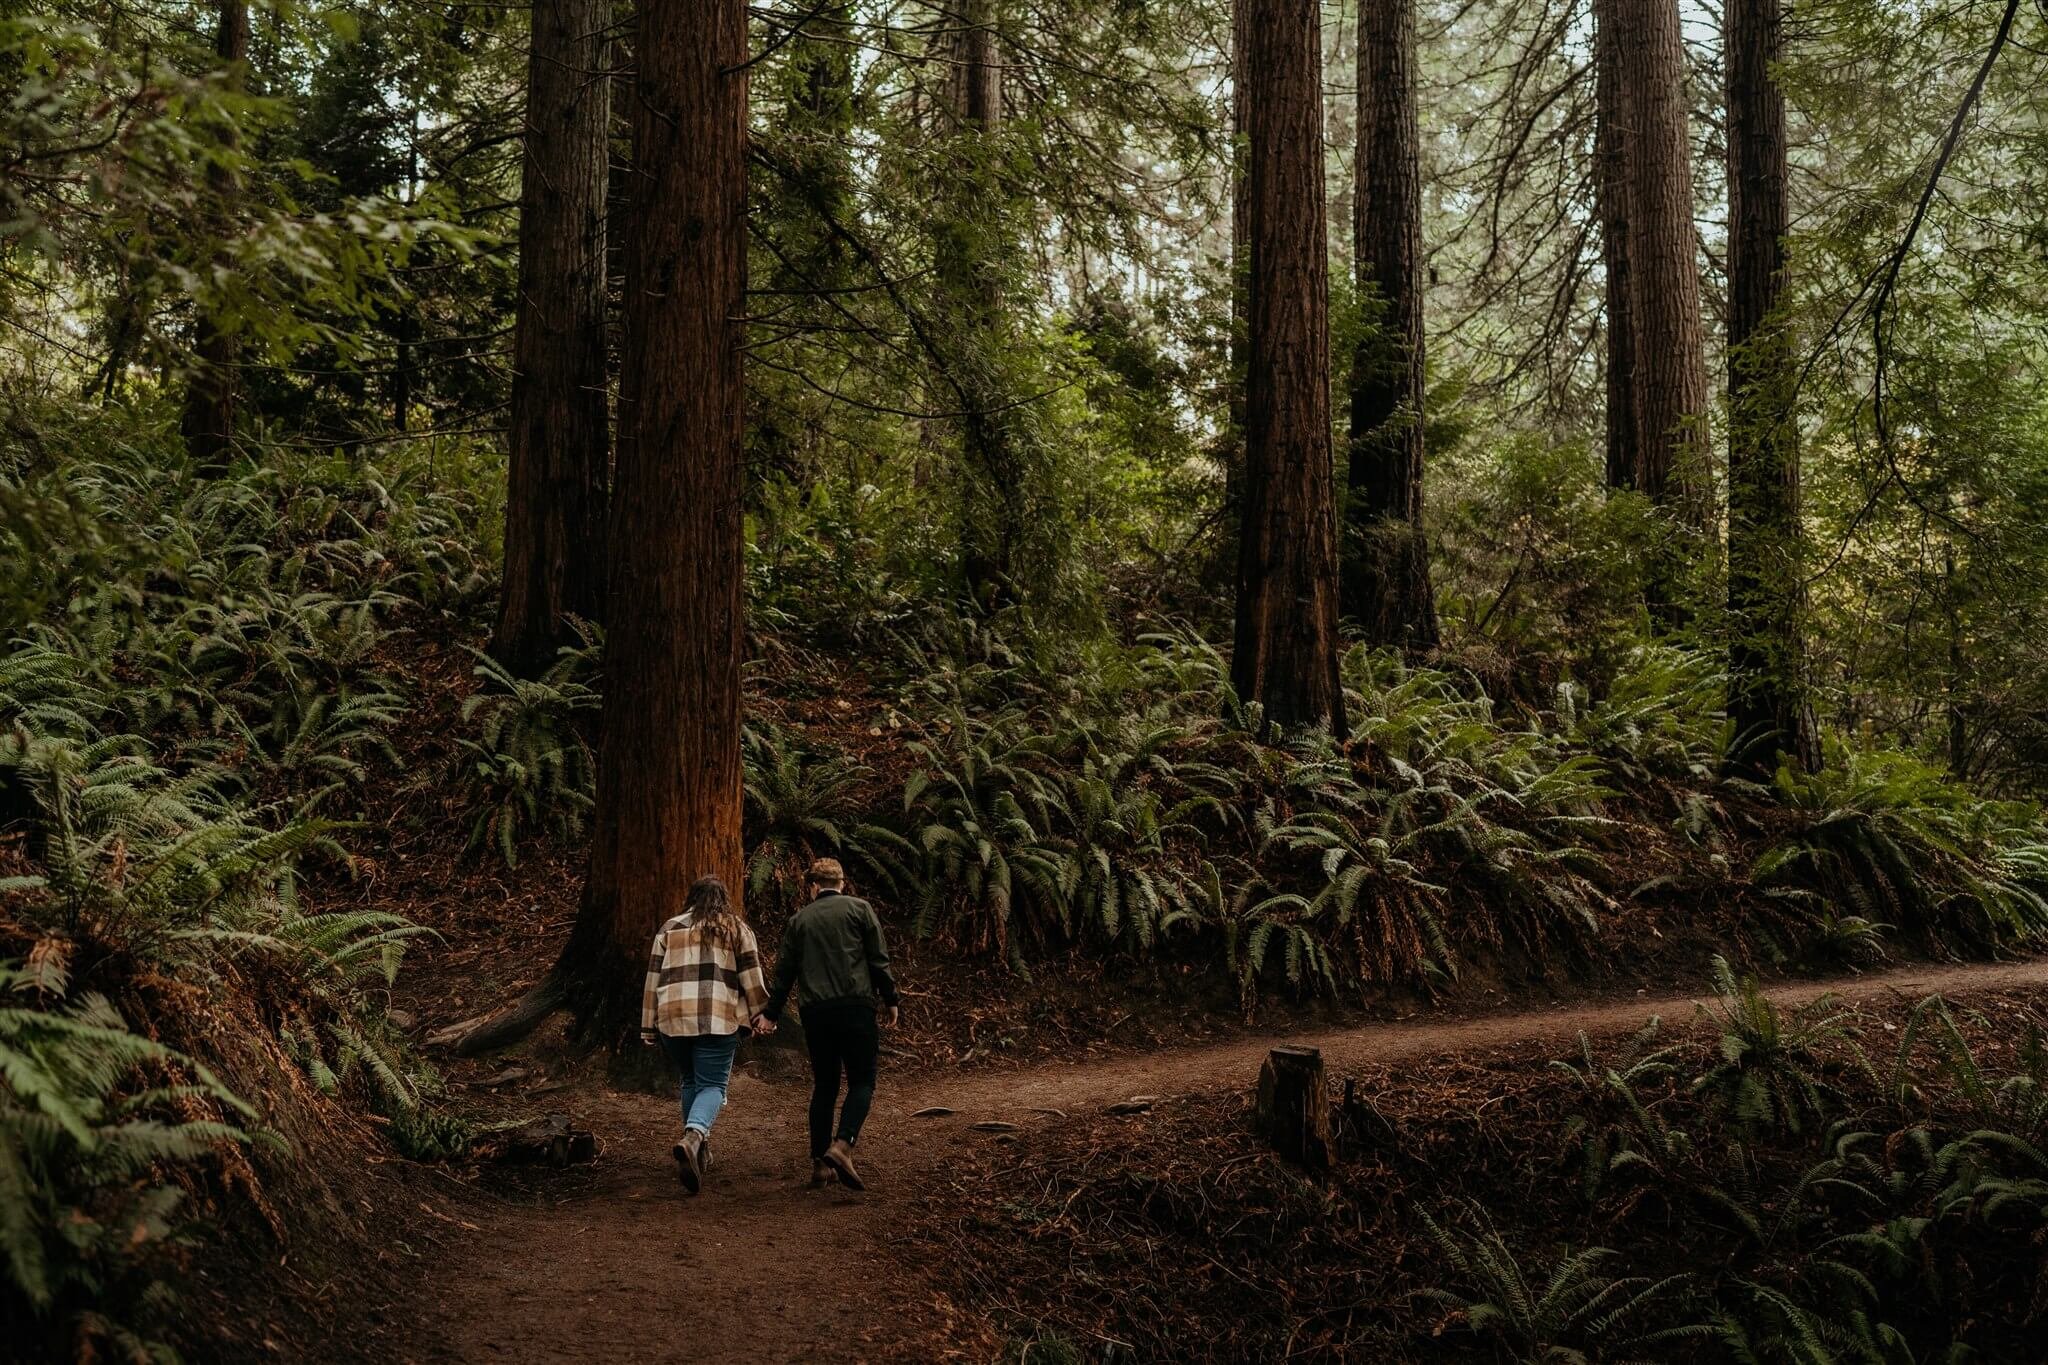 Couple holding hands, walking through the forest in Portland